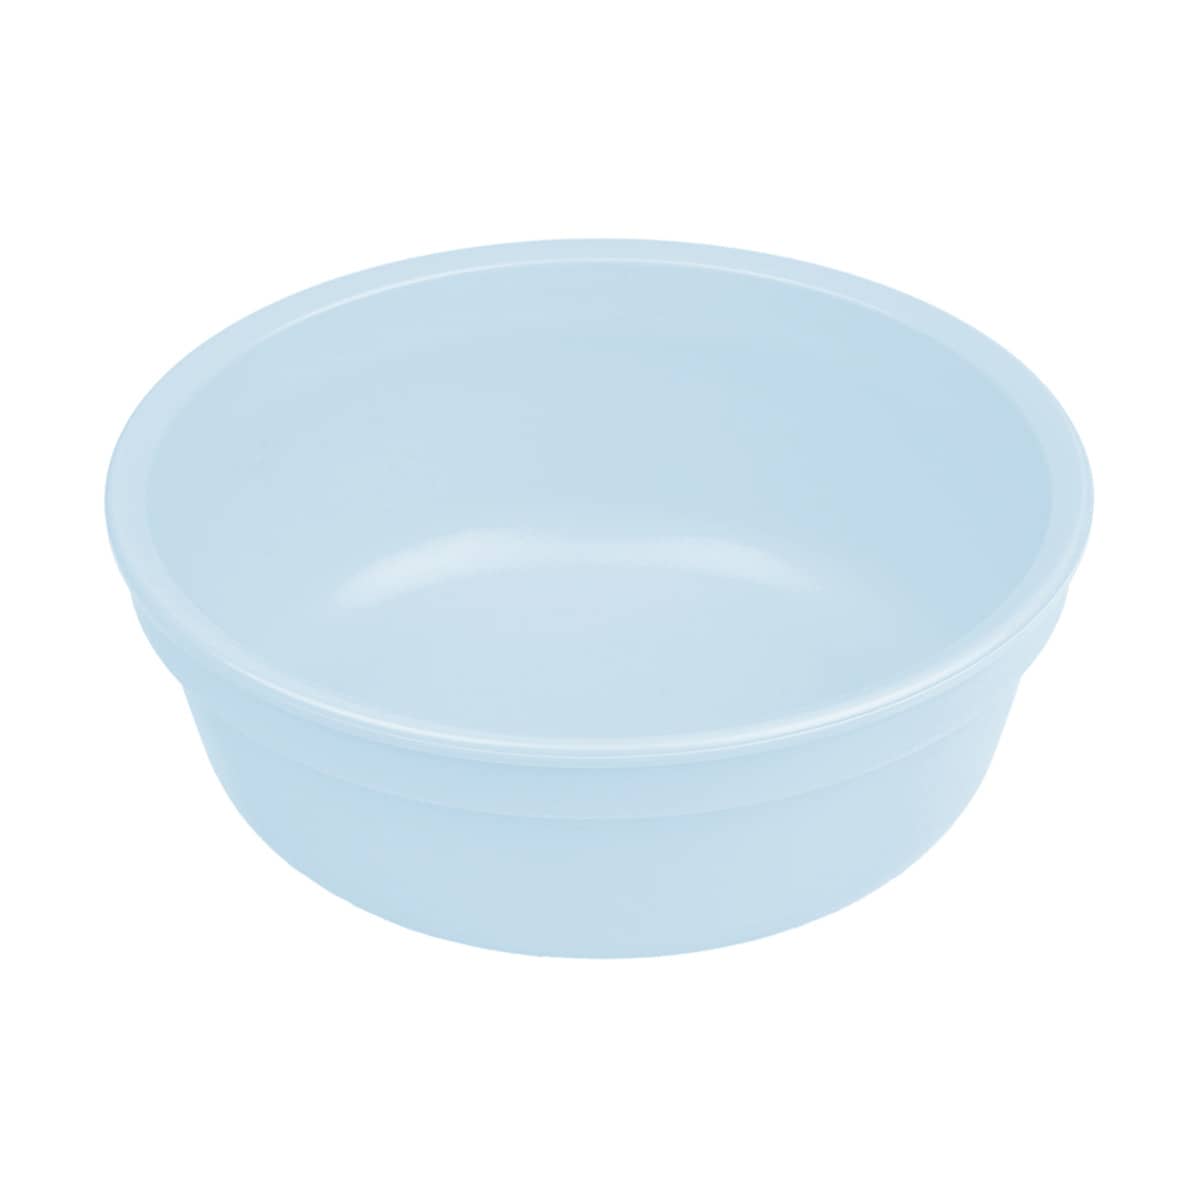 Re-Play Recycled Bowl - Naturals Collection - Ice Blue